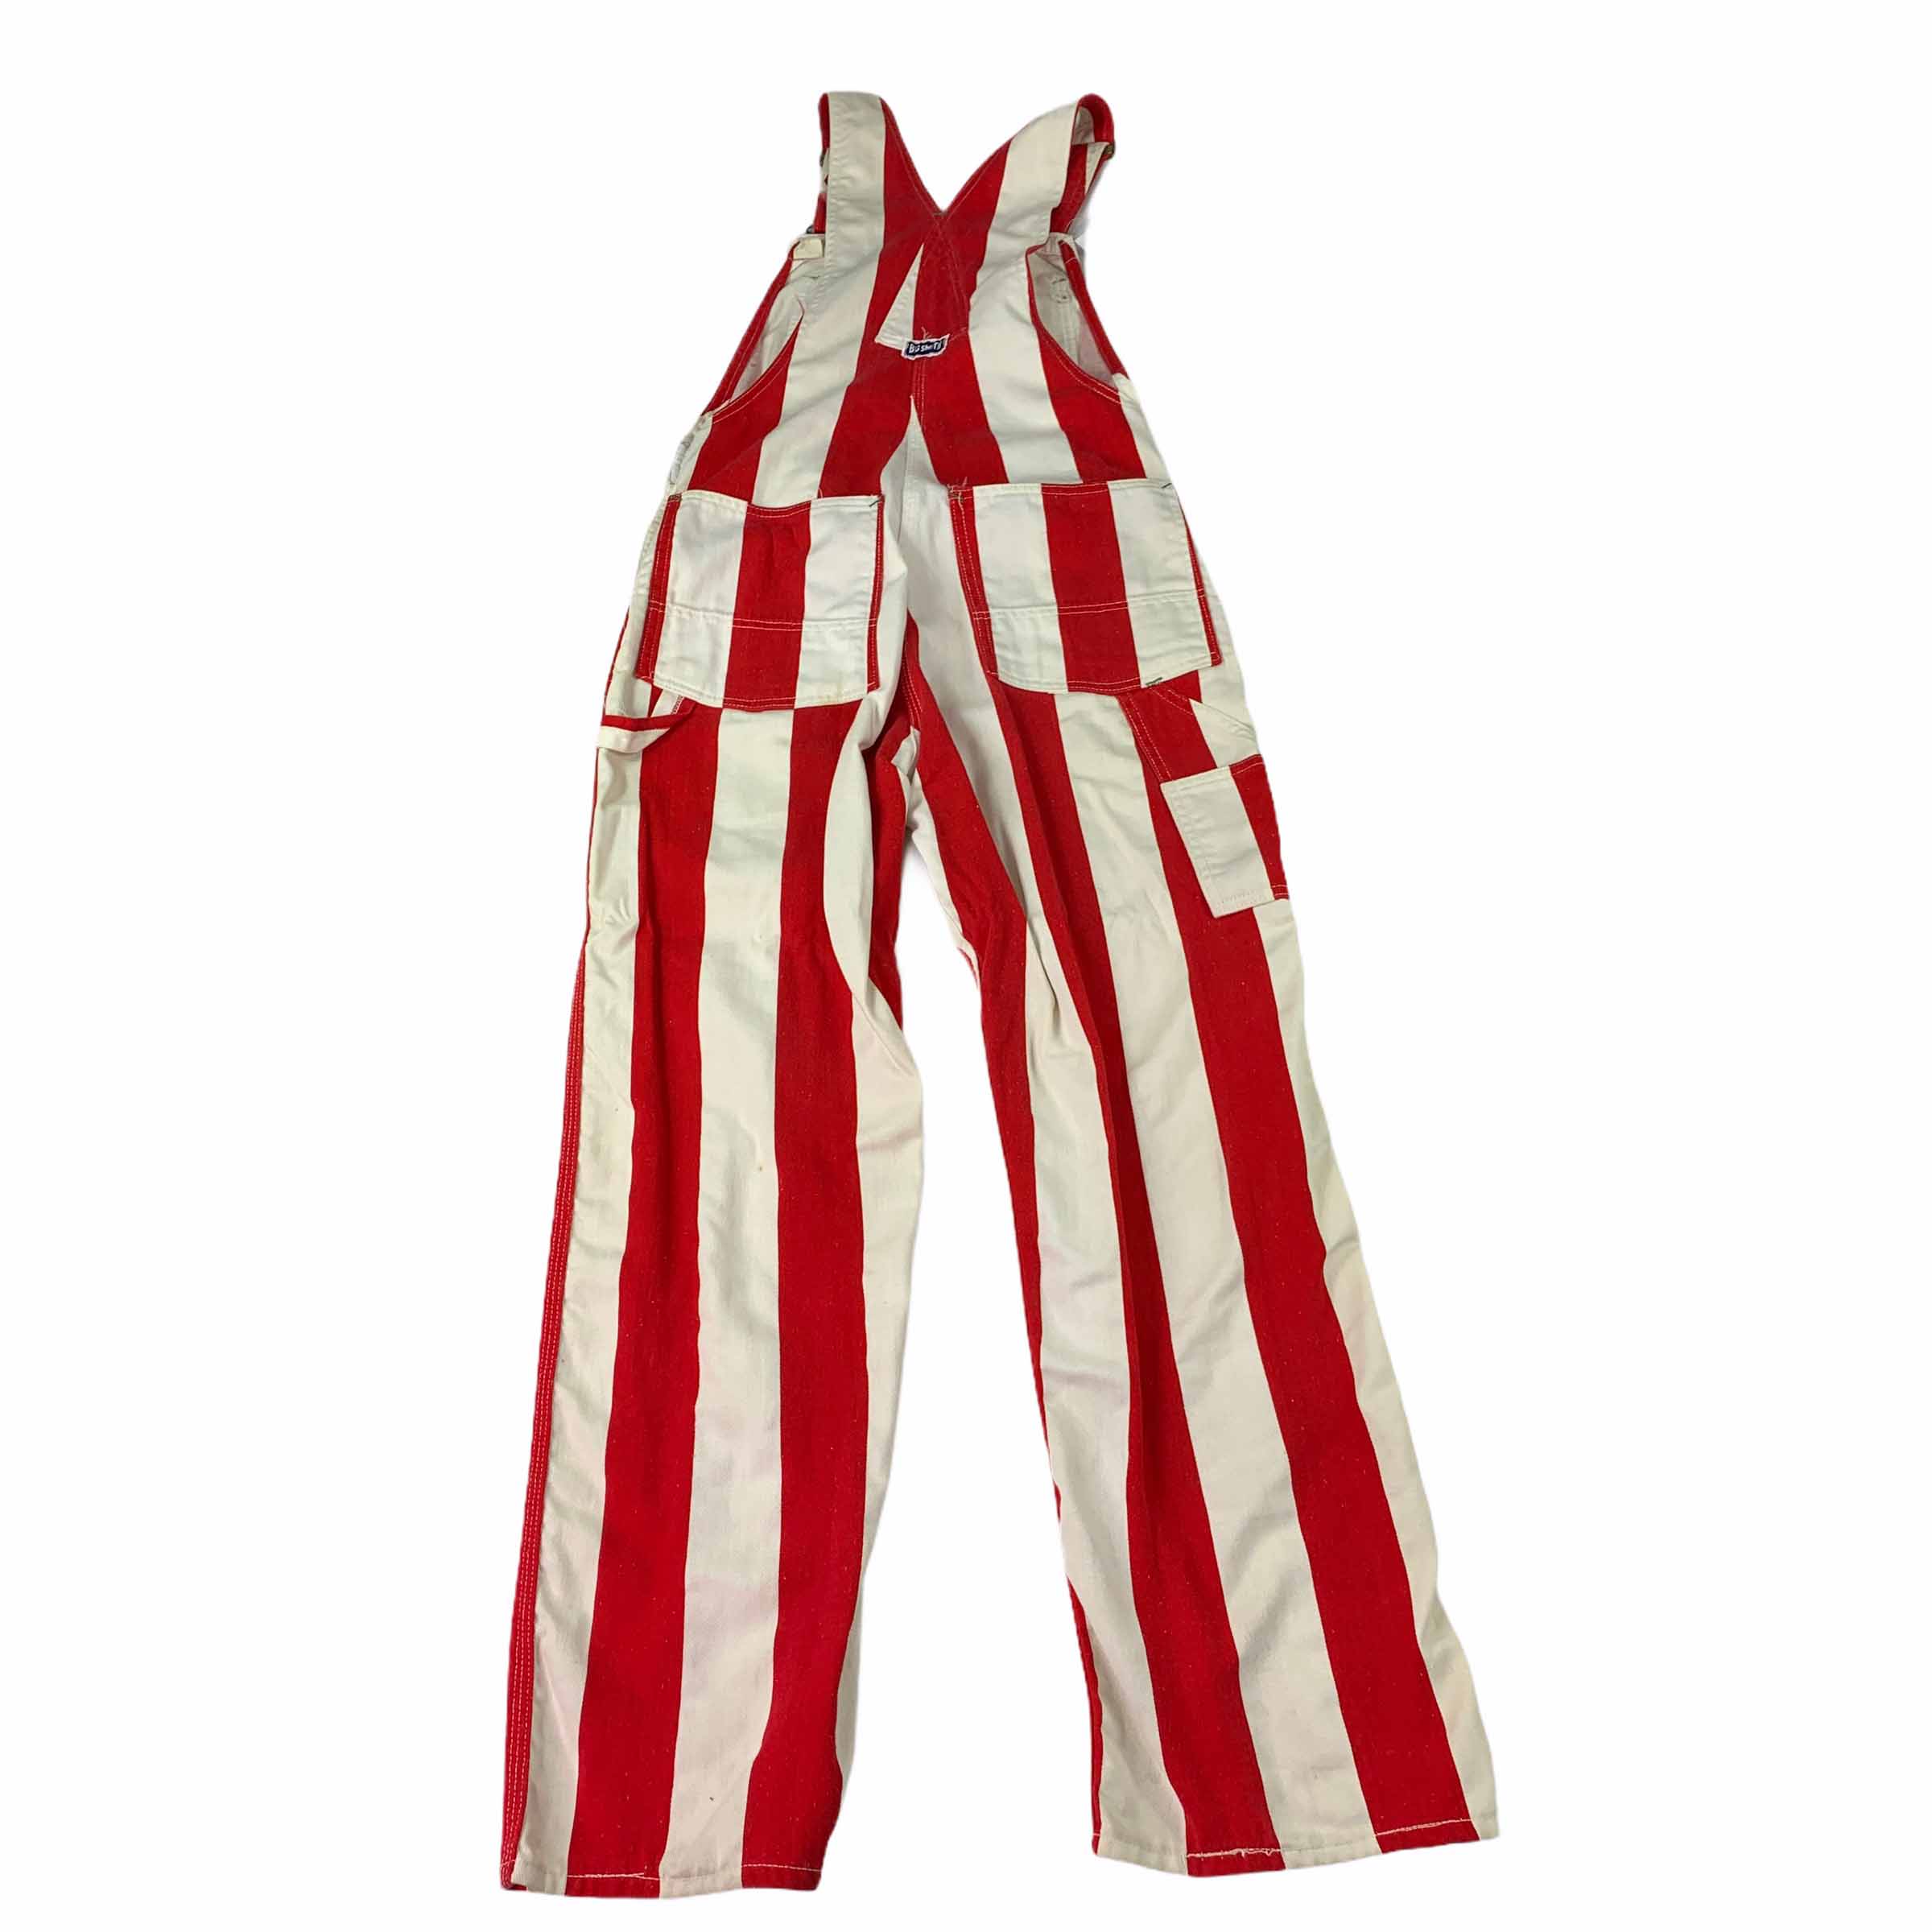 [Big Smith] Striped Suspenders WH/RED - Size Free